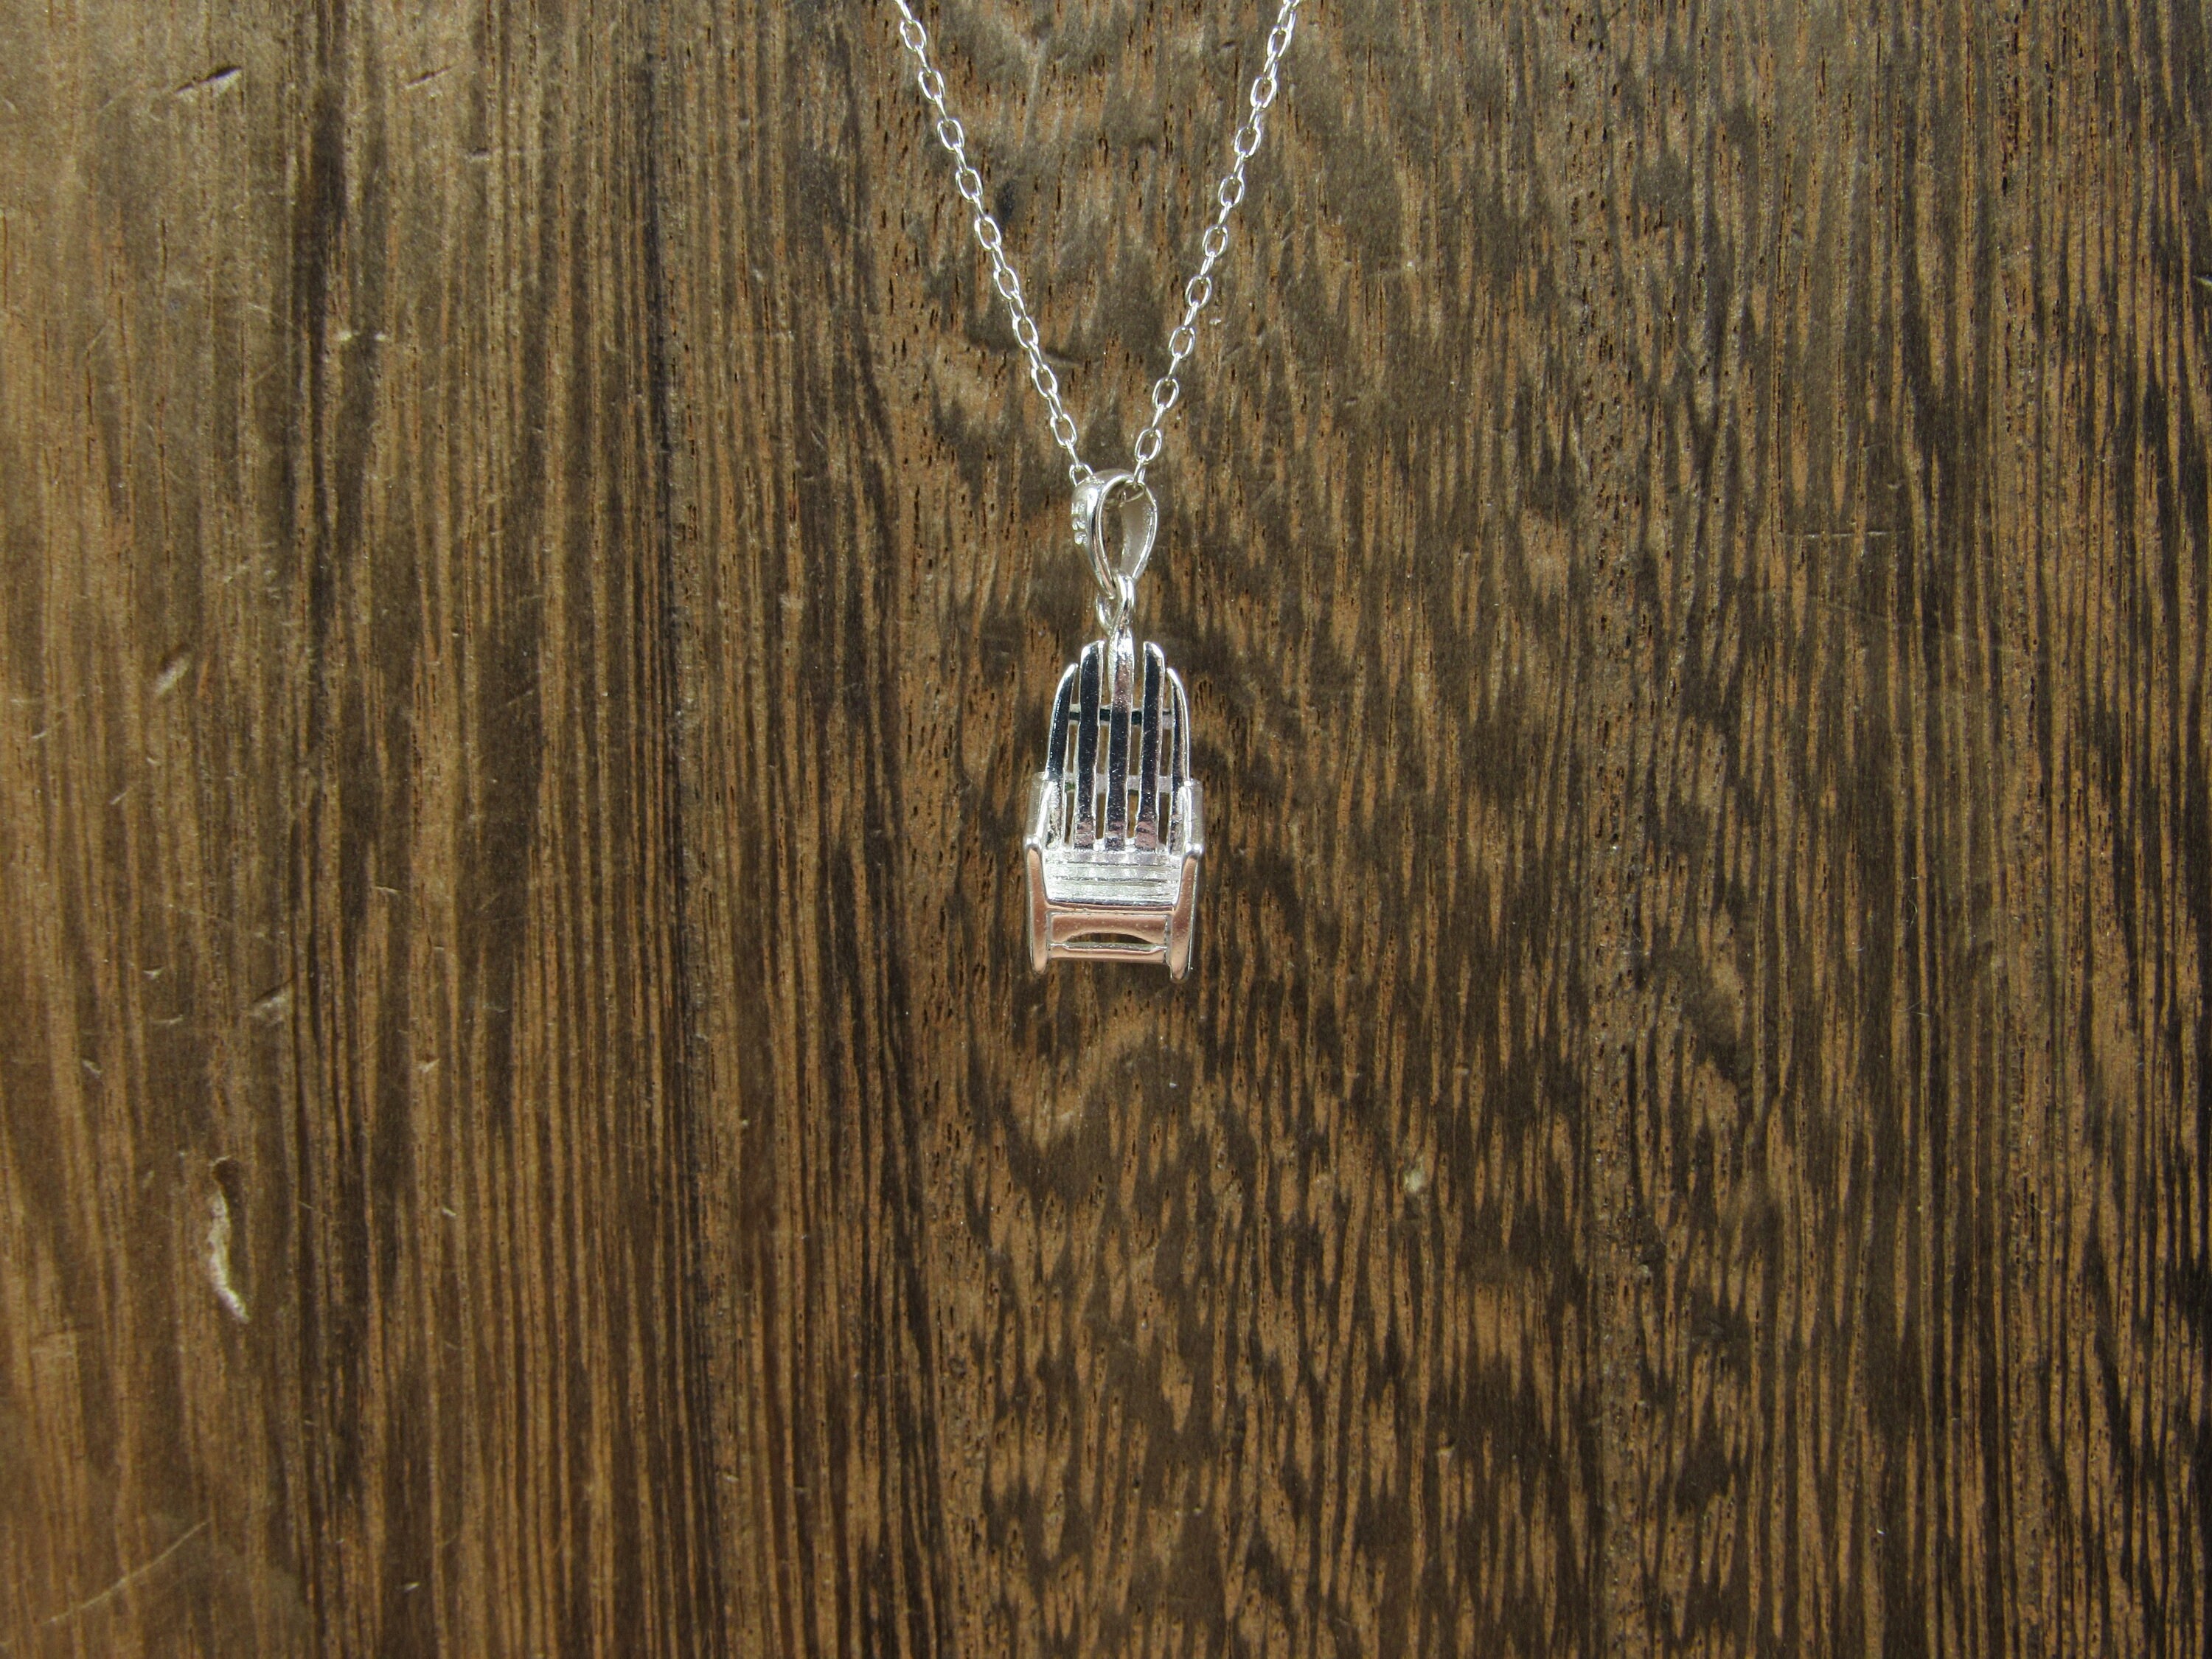 Sdueksi Chair Necklace, Alabama Brawl Chair Necklace, Silver Chair  Necklaces for Women